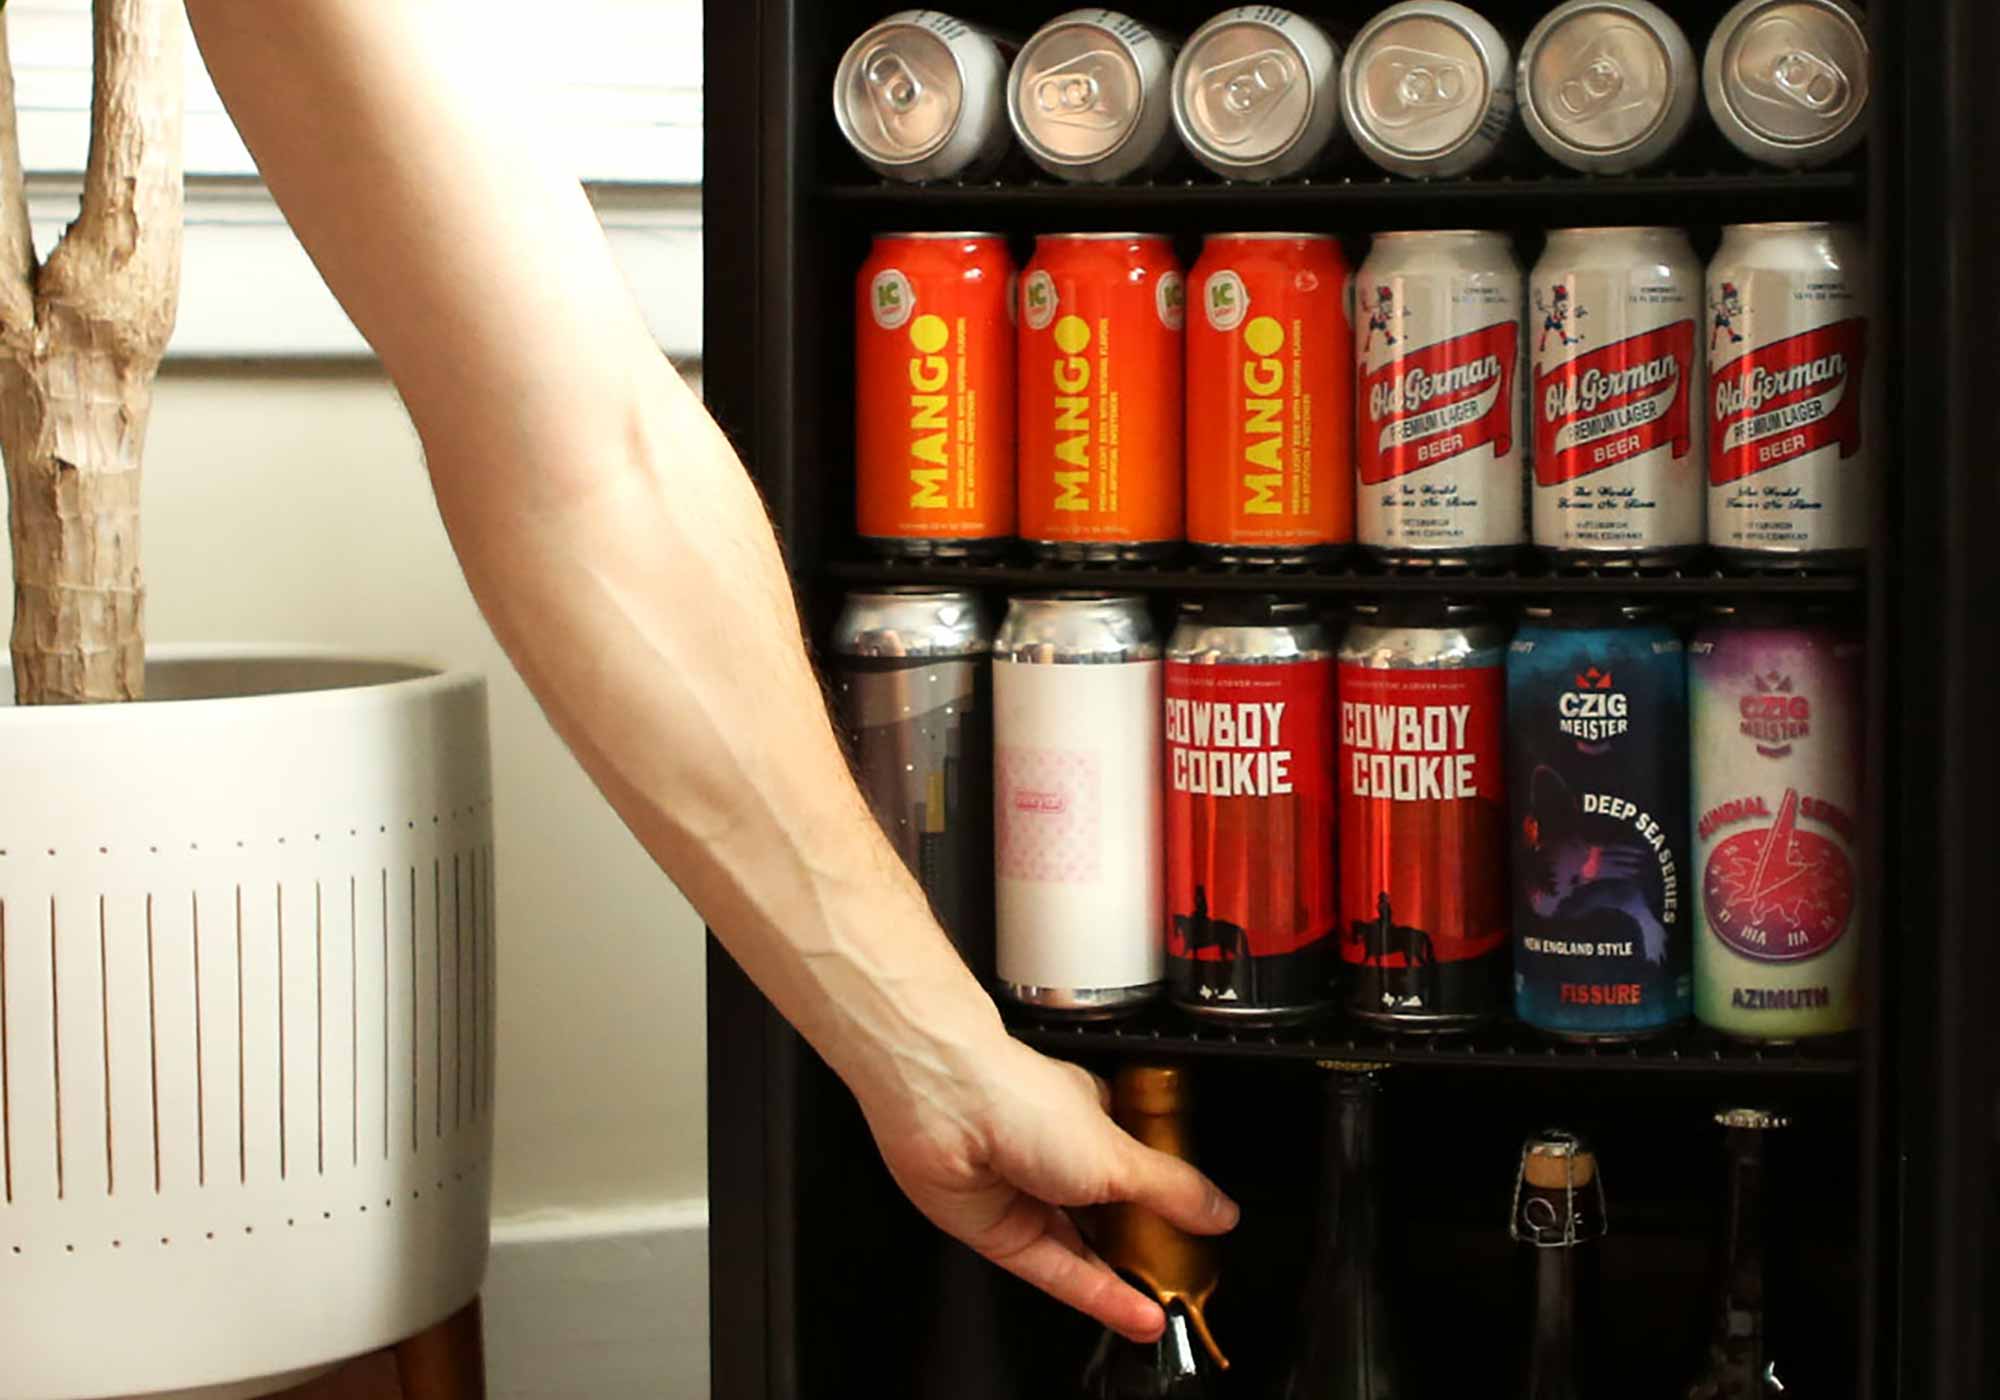 The 5-Minute Guide On How To Store Beer